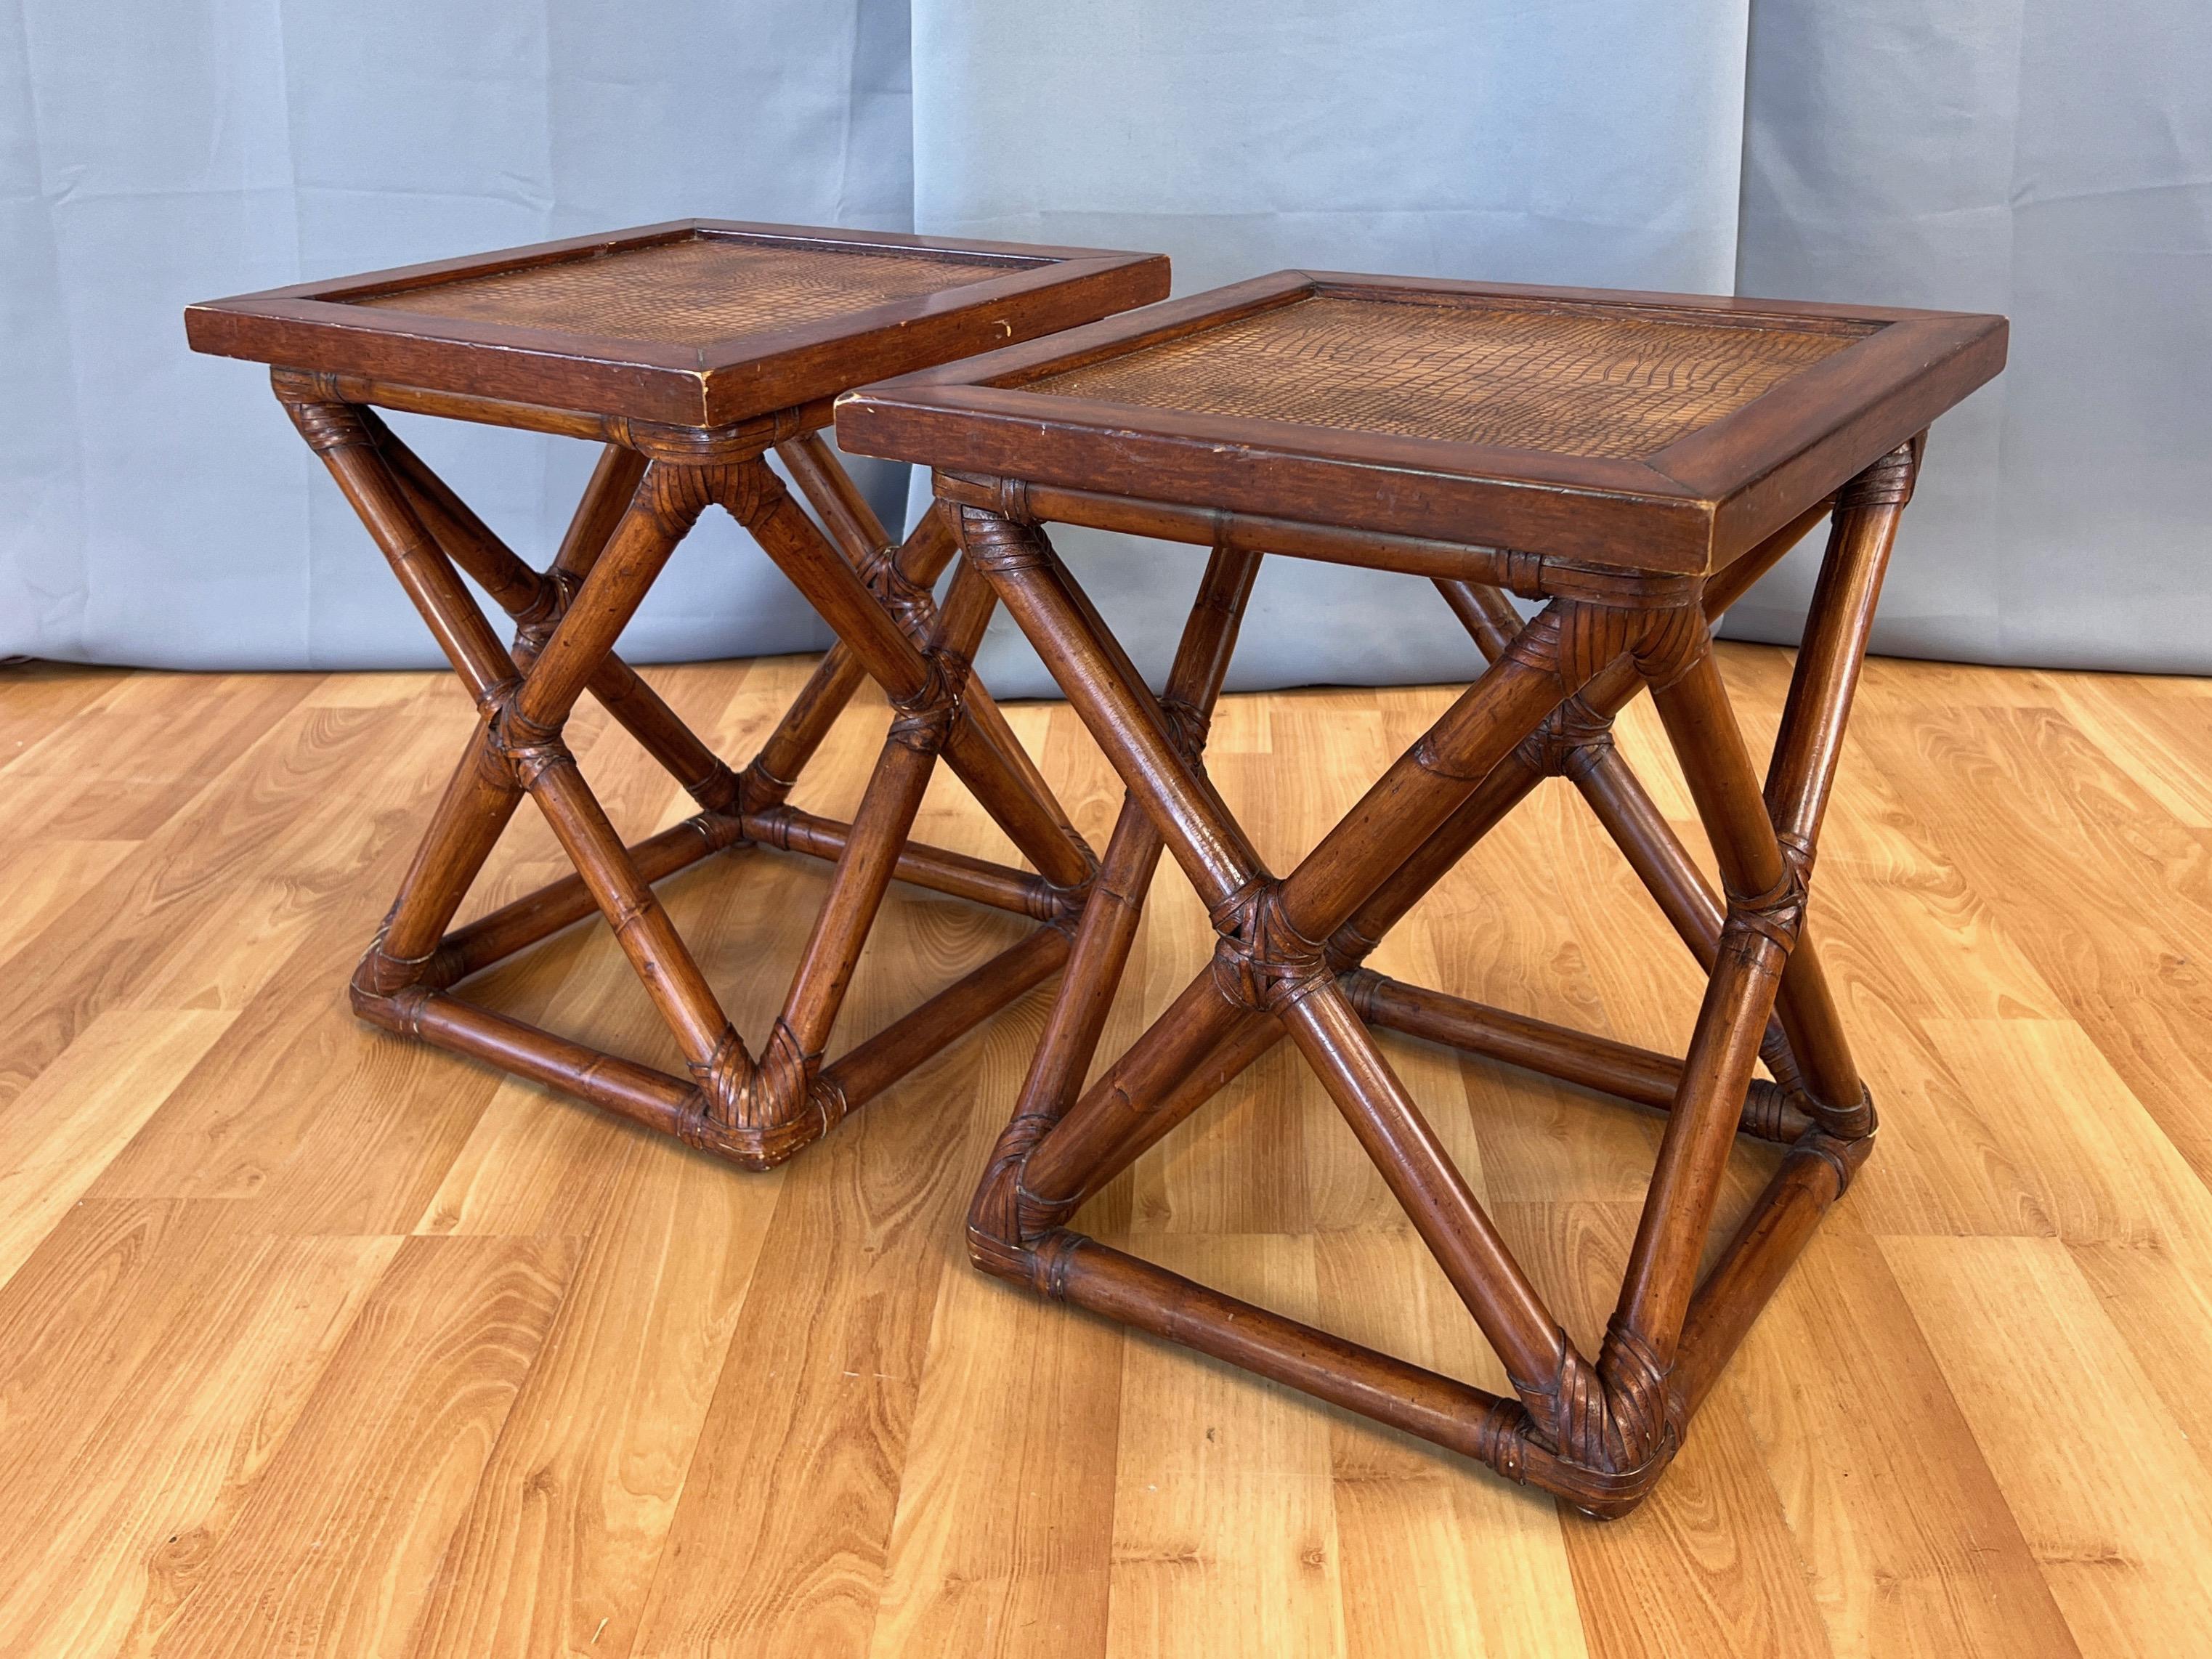 A pair of uncommon Palecek rattan and mahogany end tables with faux crocodile or alligator leather tops.

Rattan base features X-shaped sides and square bottom with wrapped and woven flat leather cord binding at all points of joinery. Mahogany